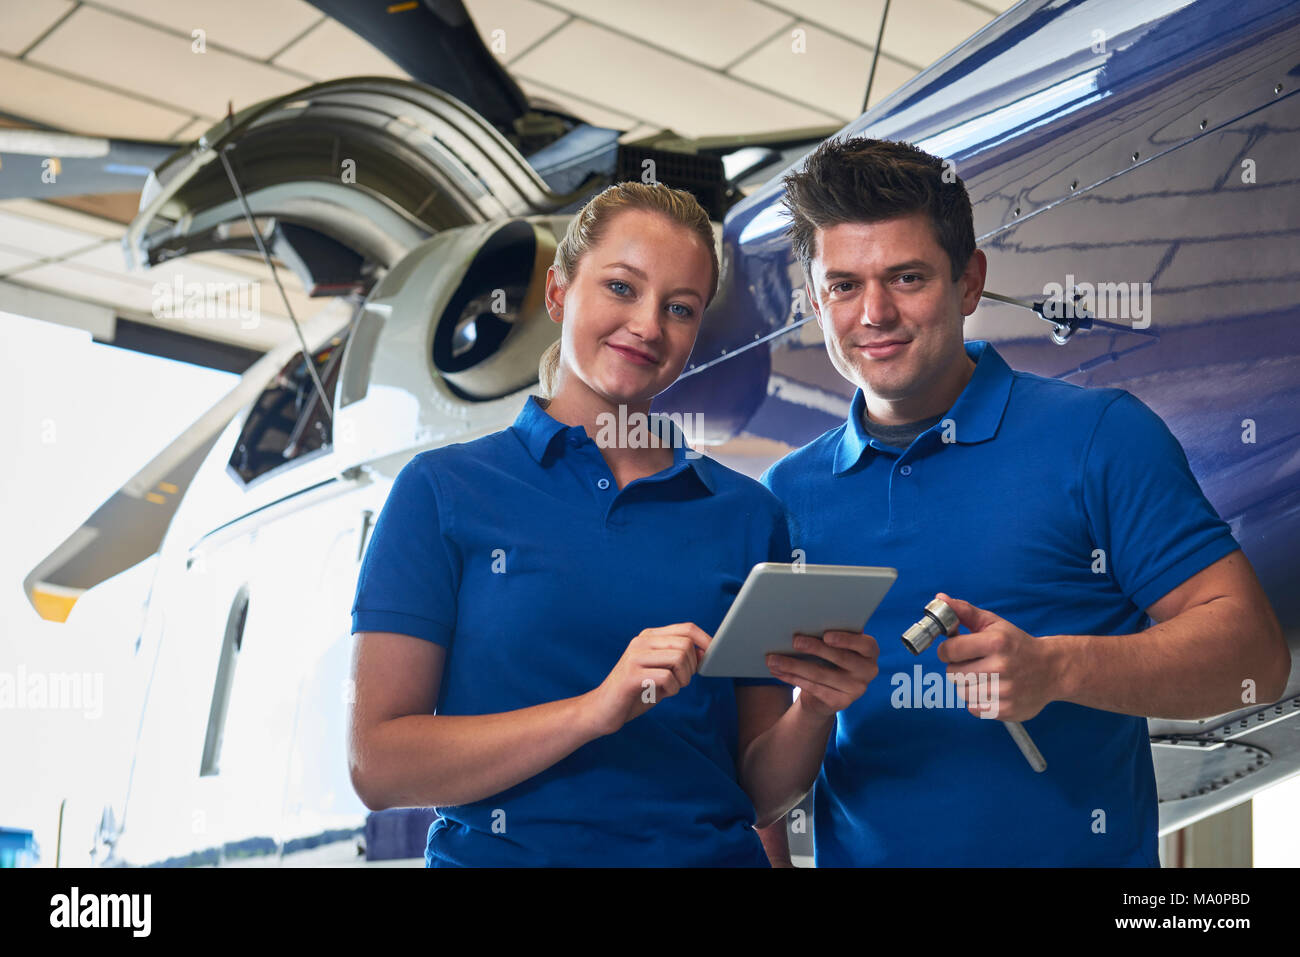 Portrait Of Aero Engineer And Apprentice Working On Helicopter In Hangar Looking At Digital Tablet Stock Photo